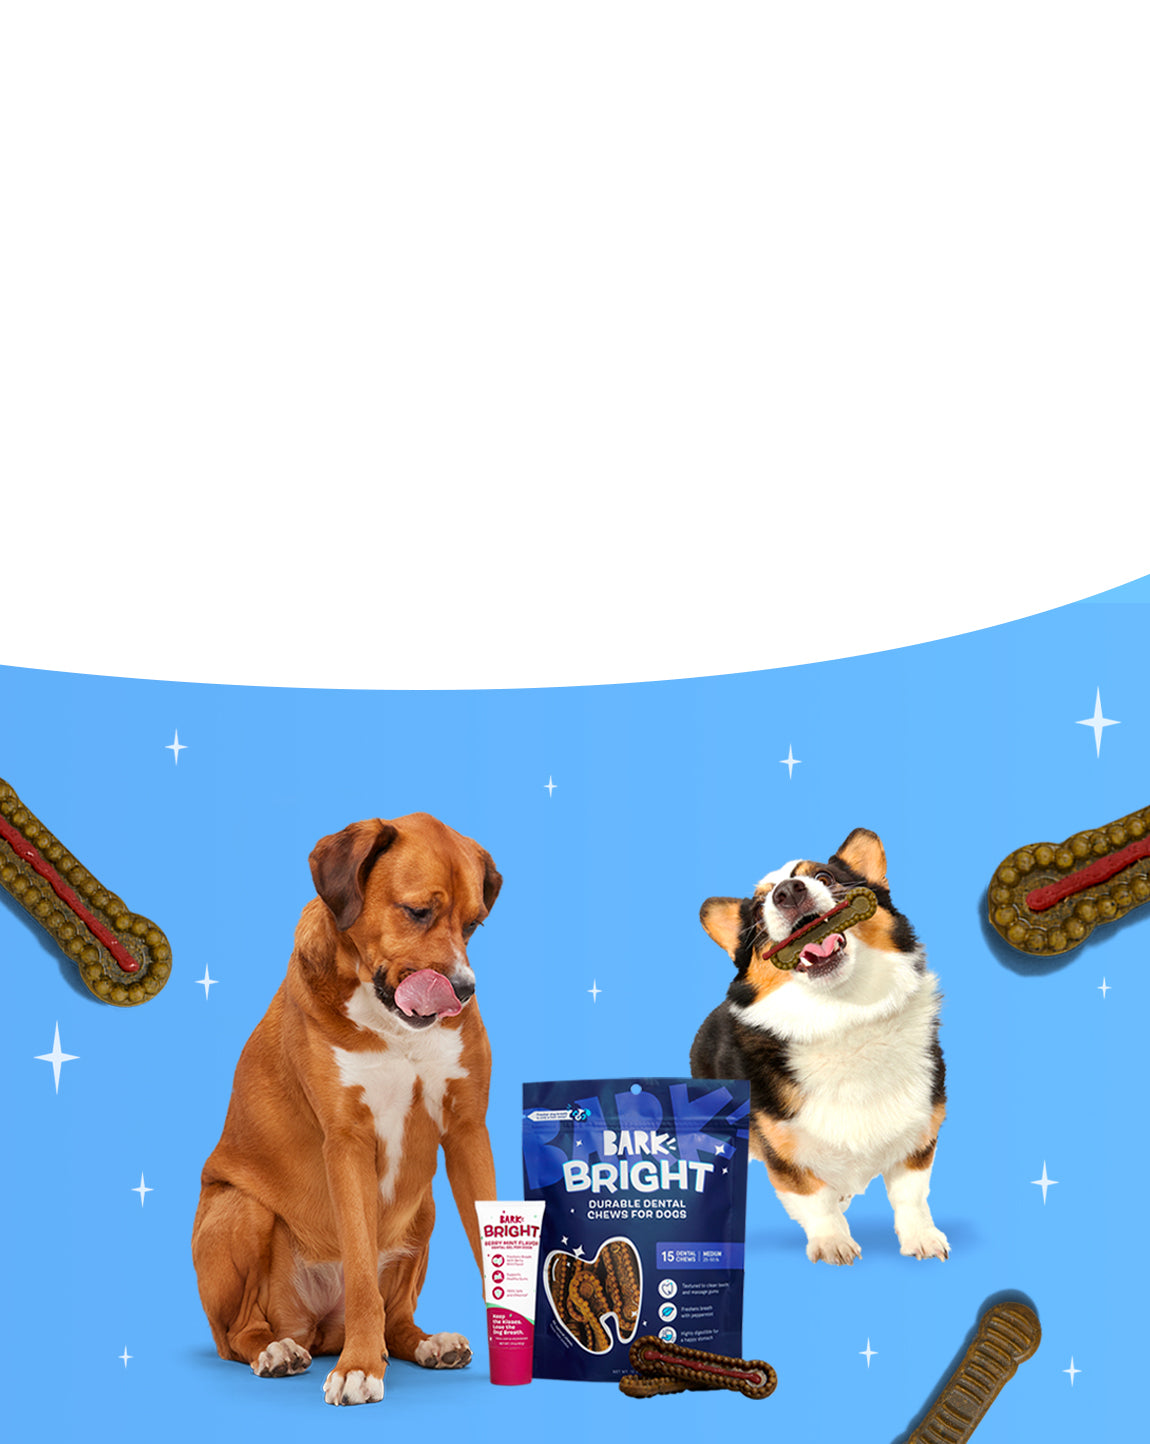 BARK: Shop BarkBox, Food, Toppers, Treats, Dental, Toys and more!